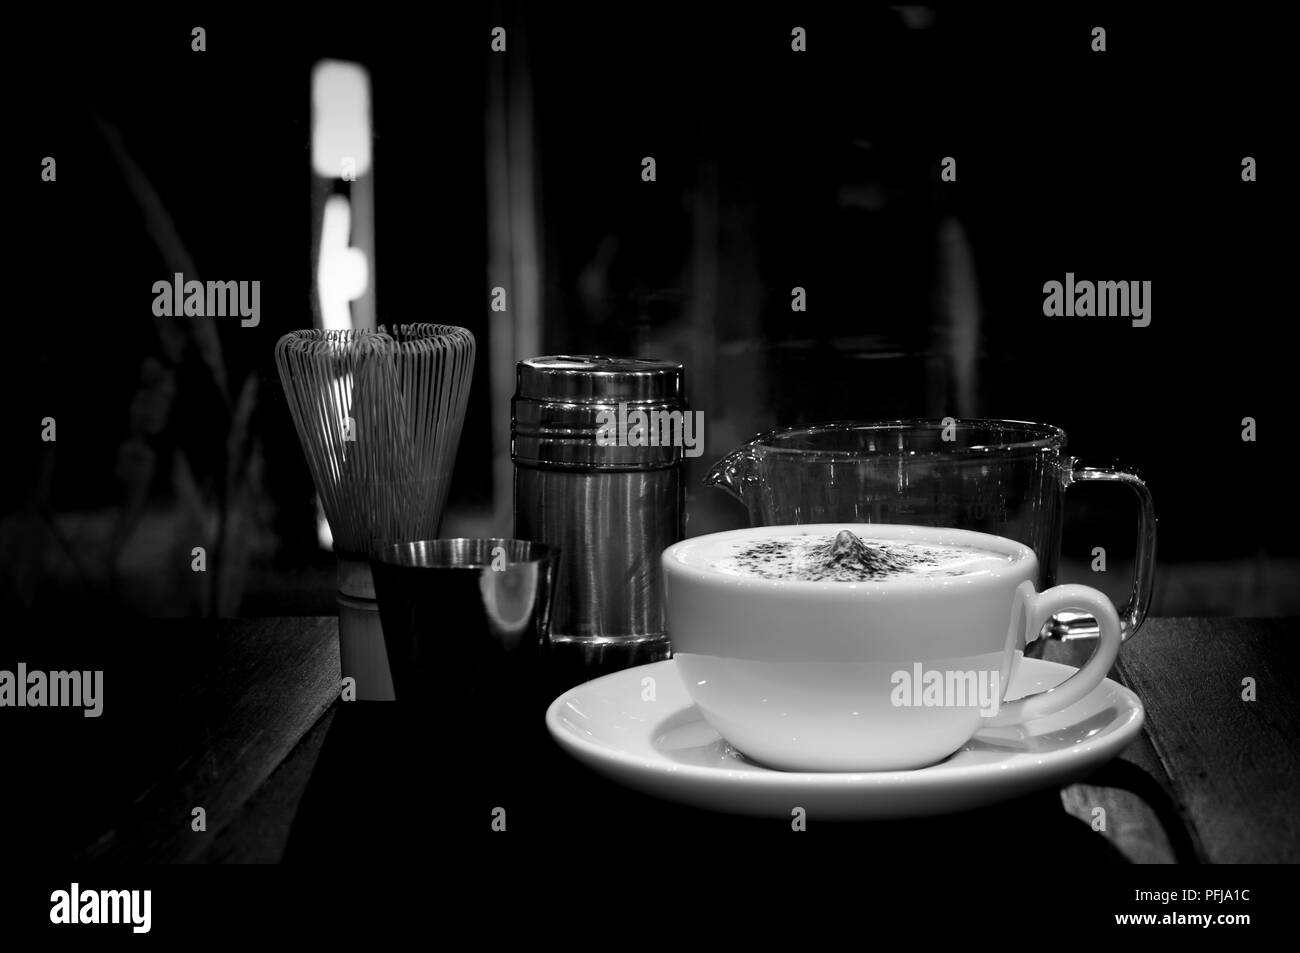 https://c8.alamy.com/comp/PFJA1C/high-contrast-coffee-cup-and-measuring-cup-and-coffee-set-in-black-and-white-PFJA1C.jpg